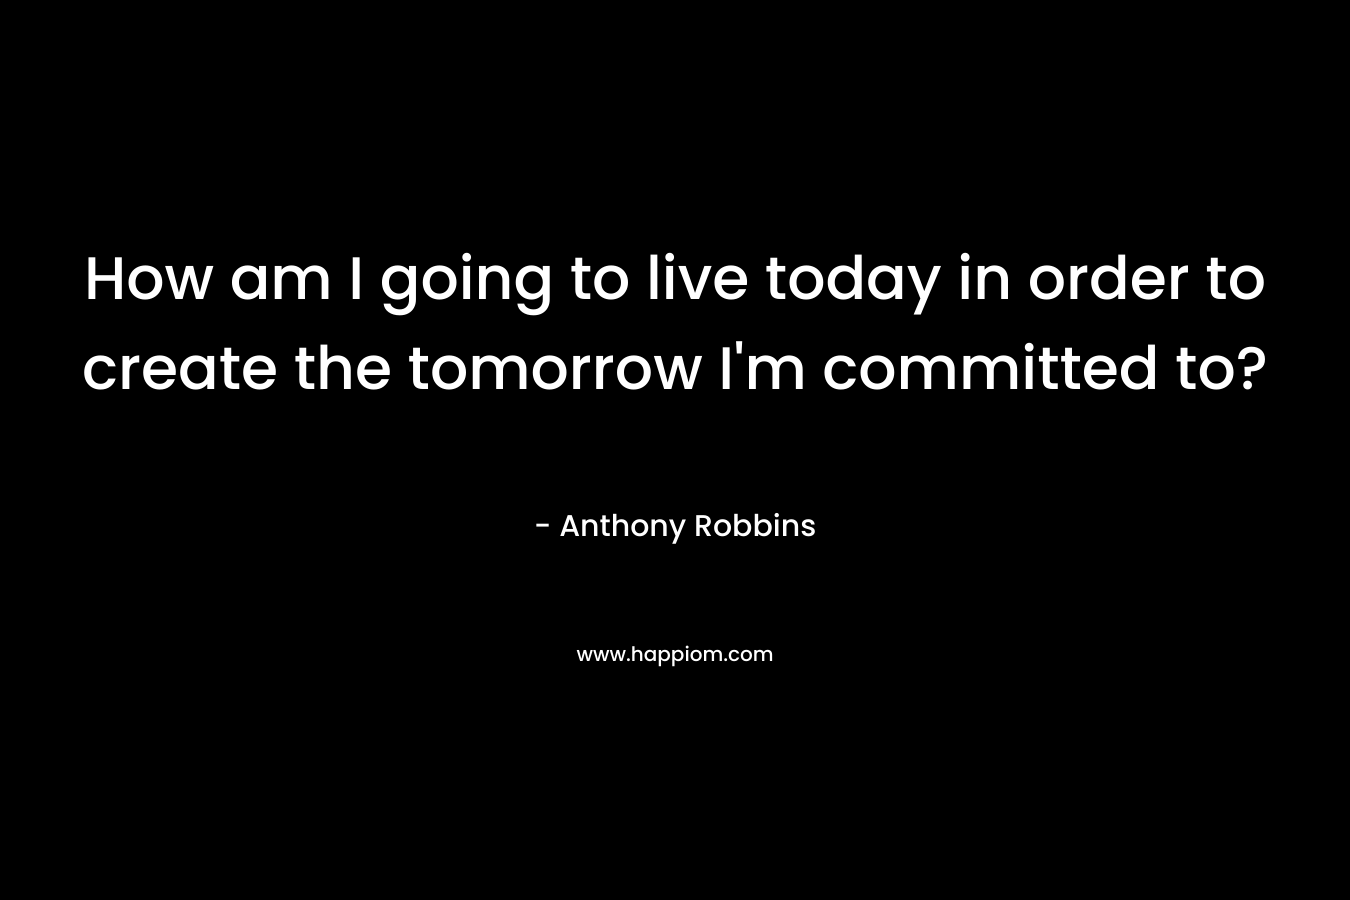 How am I going to live today in order to create the tomorrow I’m committed to? – Anthony Robbins